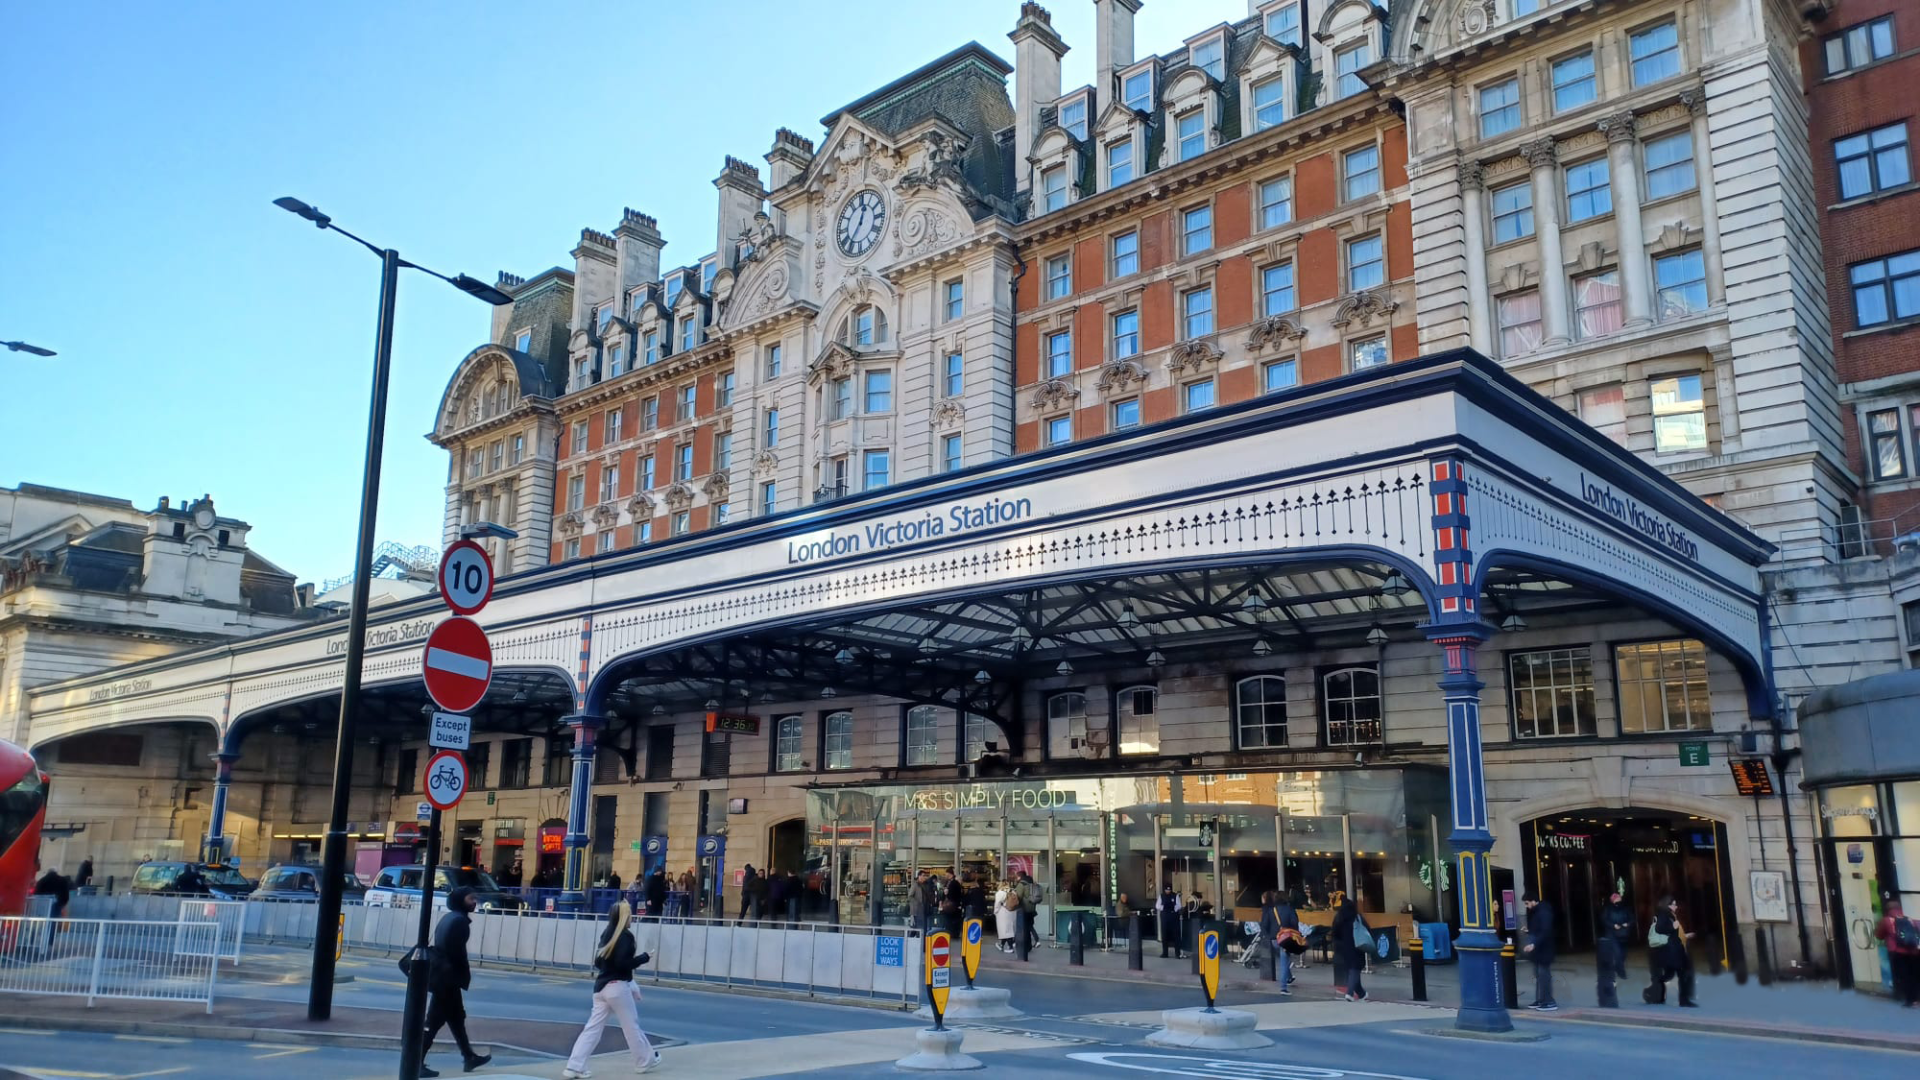 Barhale has been awarded the Victoria Station Trunk Main Replacement contract